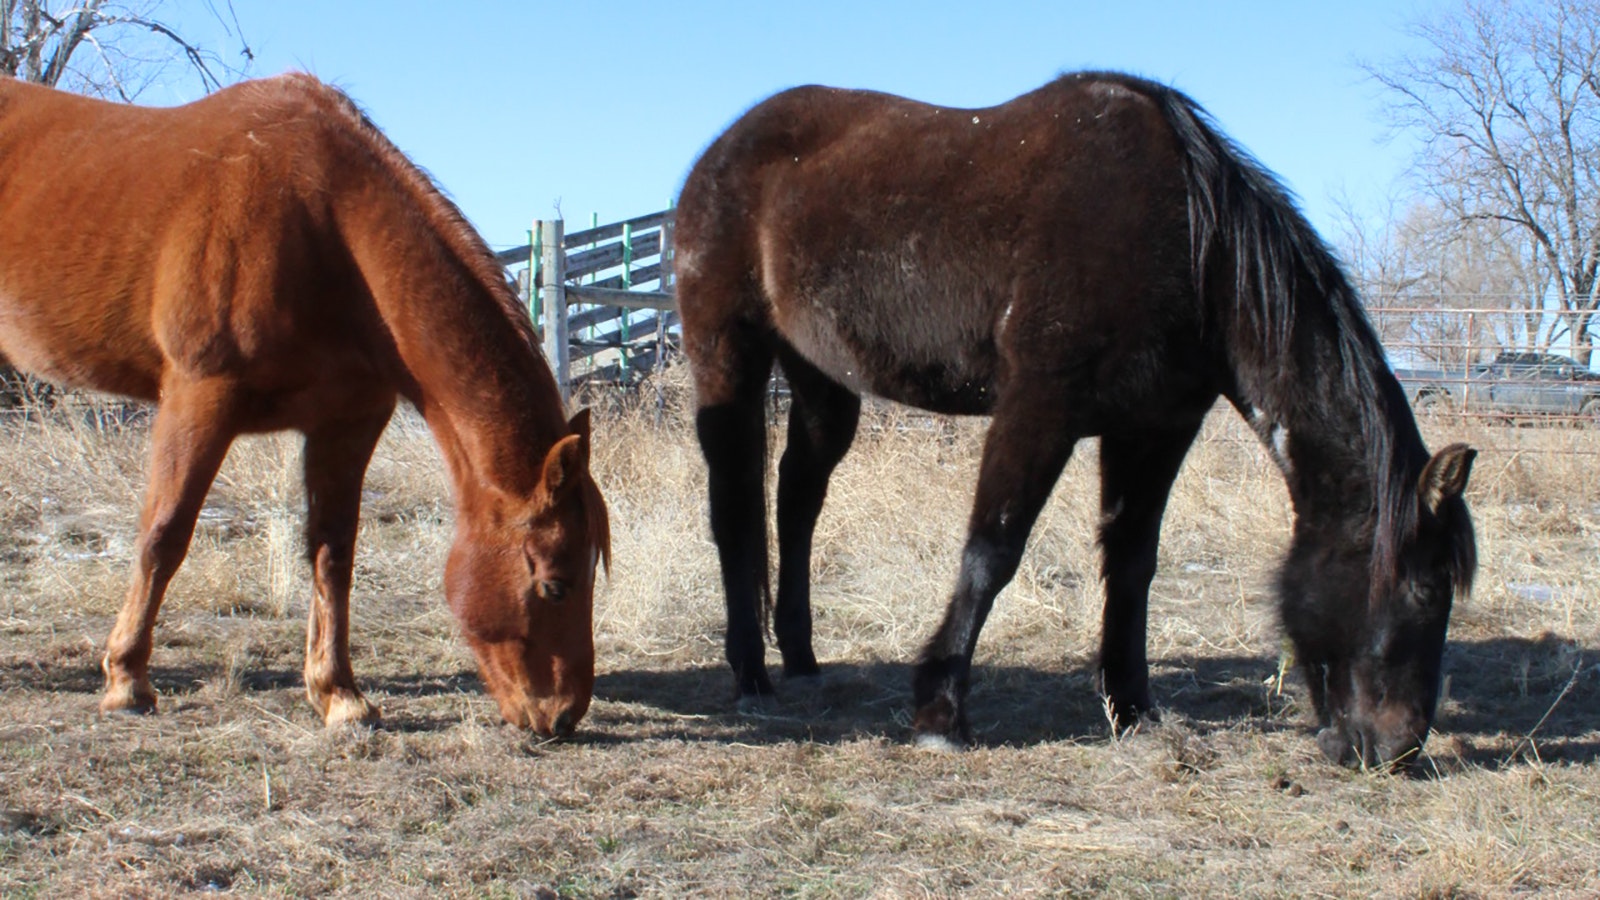 Ohio and Haatali are a pair of rescue horses Samira Tennyson adopted.